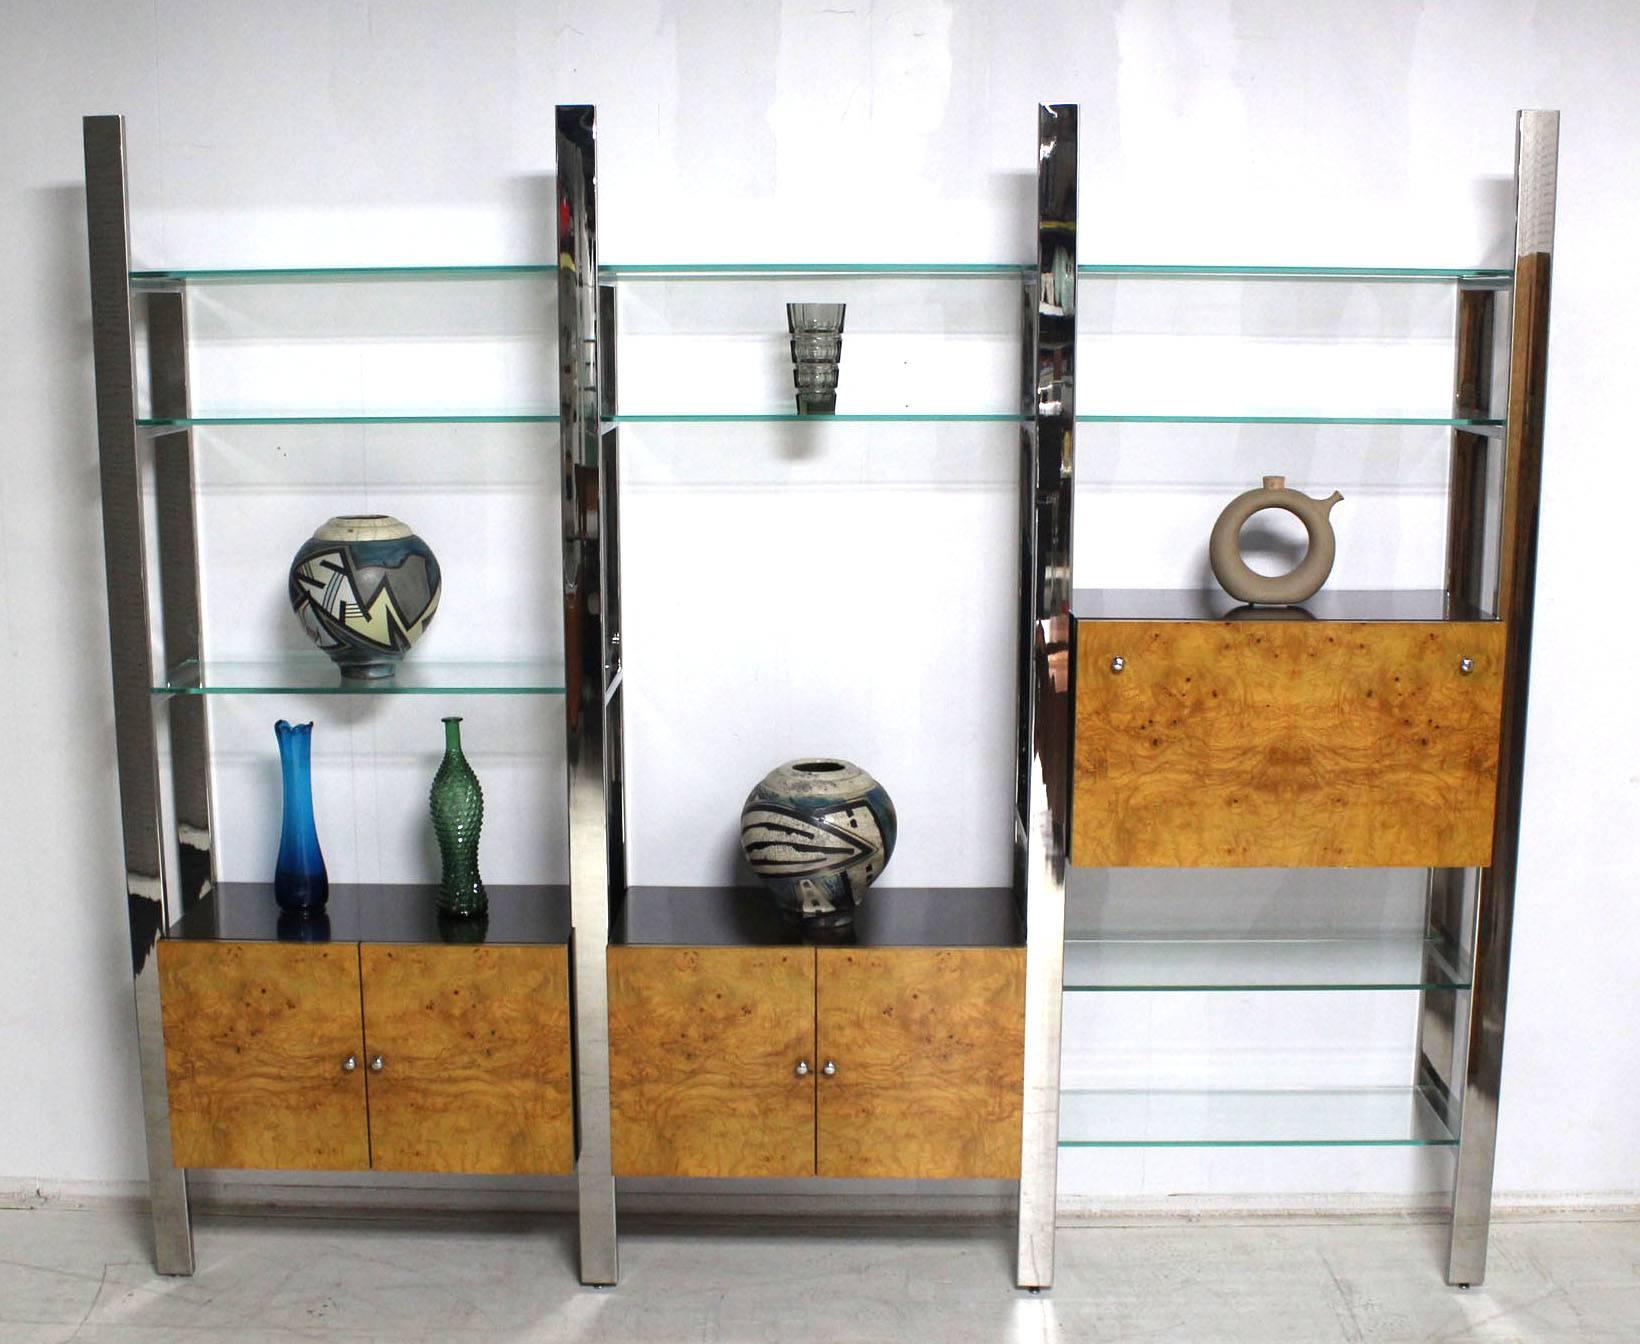 Mirror chrome polished stainless steel frame, burl wood cabinets, thick glass shelves Mid-Century Modern wall unit. Secretary drop desk compartment. Outstanding modern decor setting piece of furniture. Multiple possibilities. 